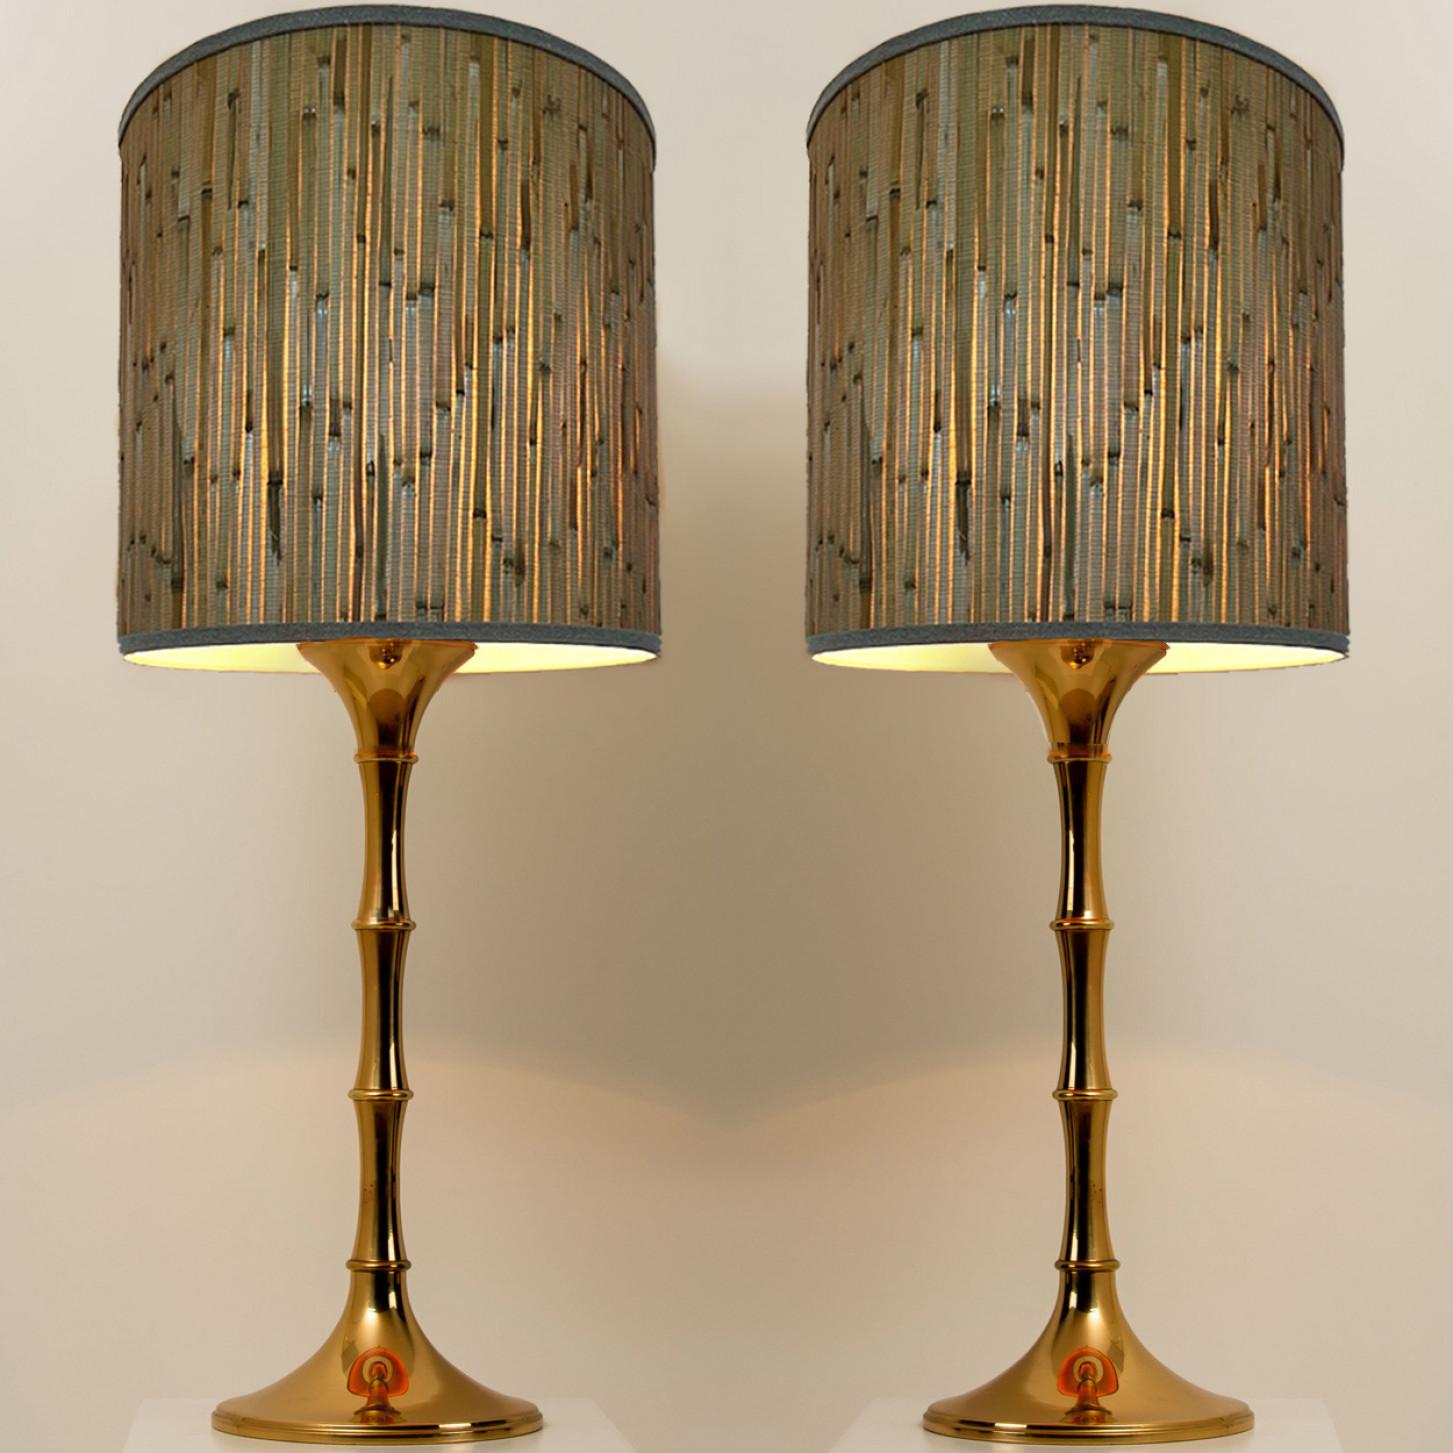 Pair of Table Lamps Gold Brass and Bamboo Shade by Ingo Maurer, Germany, 1968 In Good Condition For Sale In Rijssen, NL